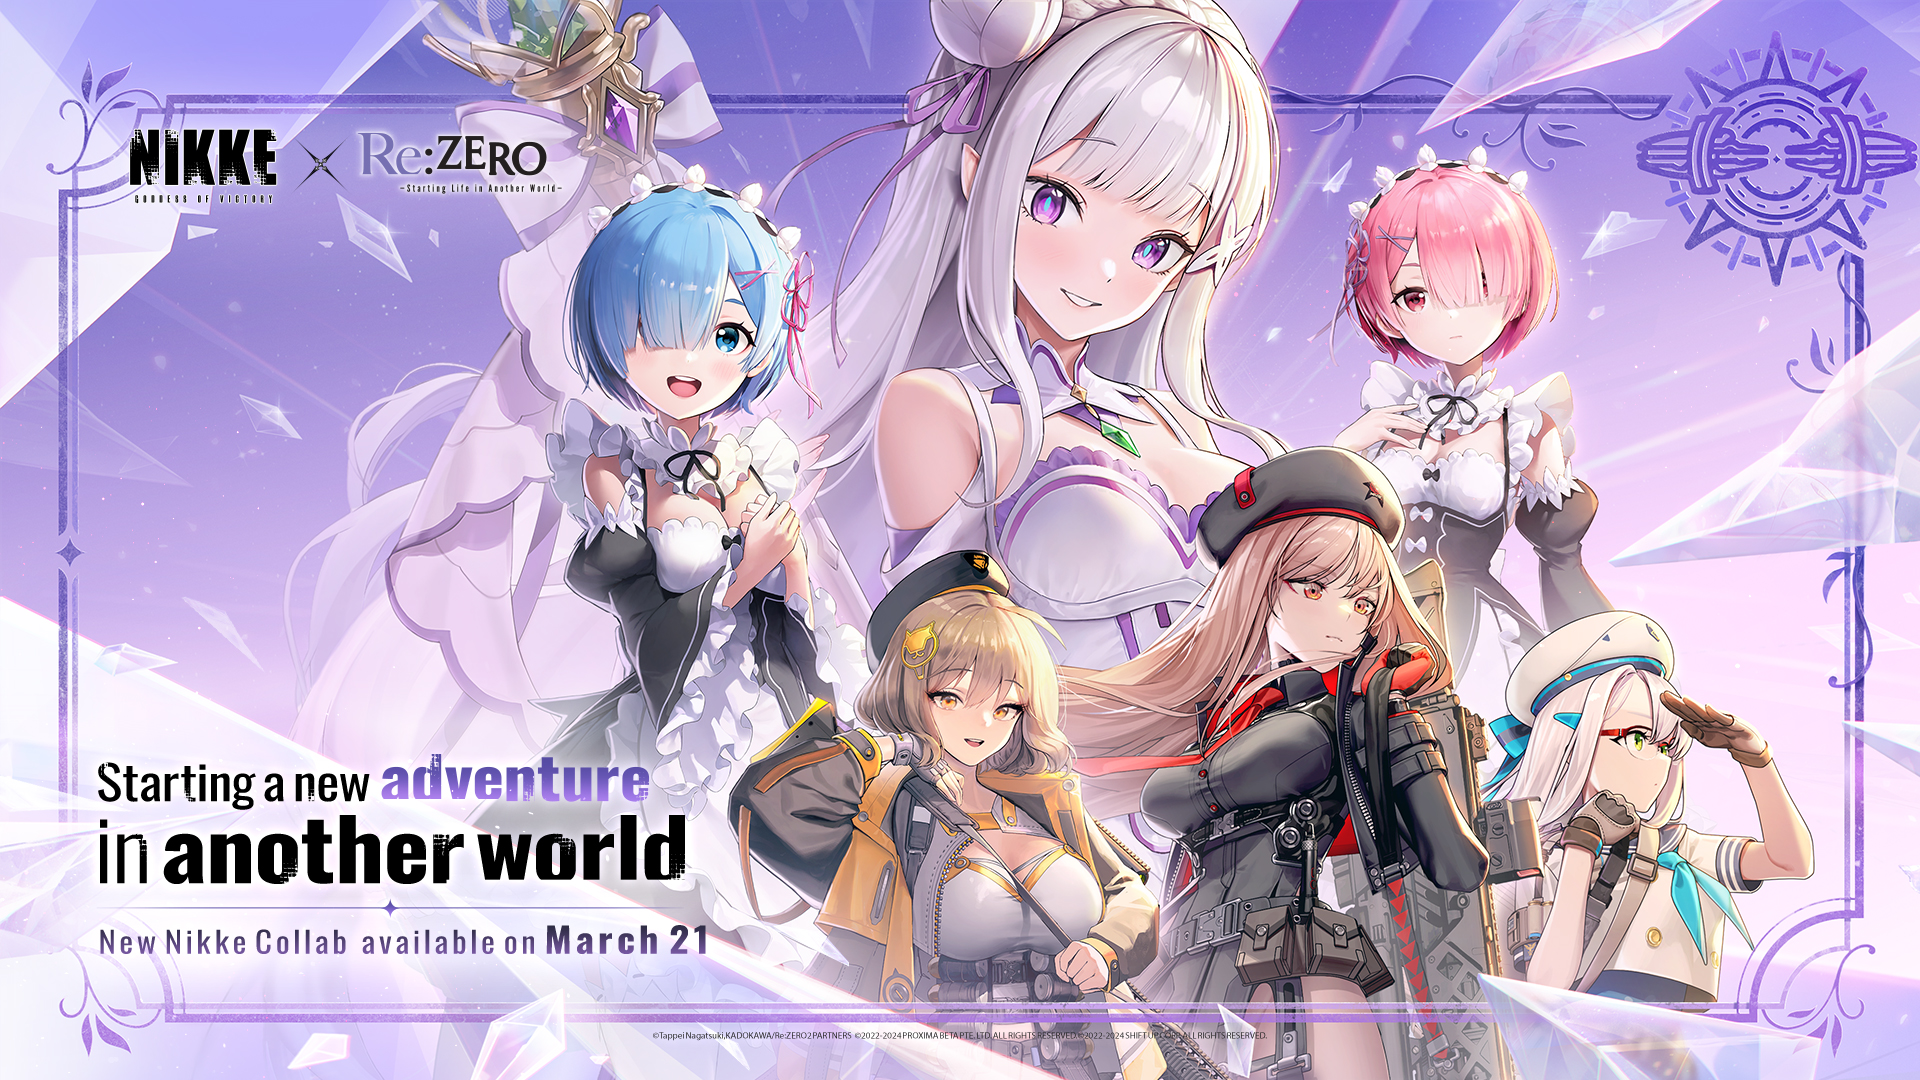 Goddess of Victory: Nikke Reveals Re:ZERO Collab Launching Later This Month